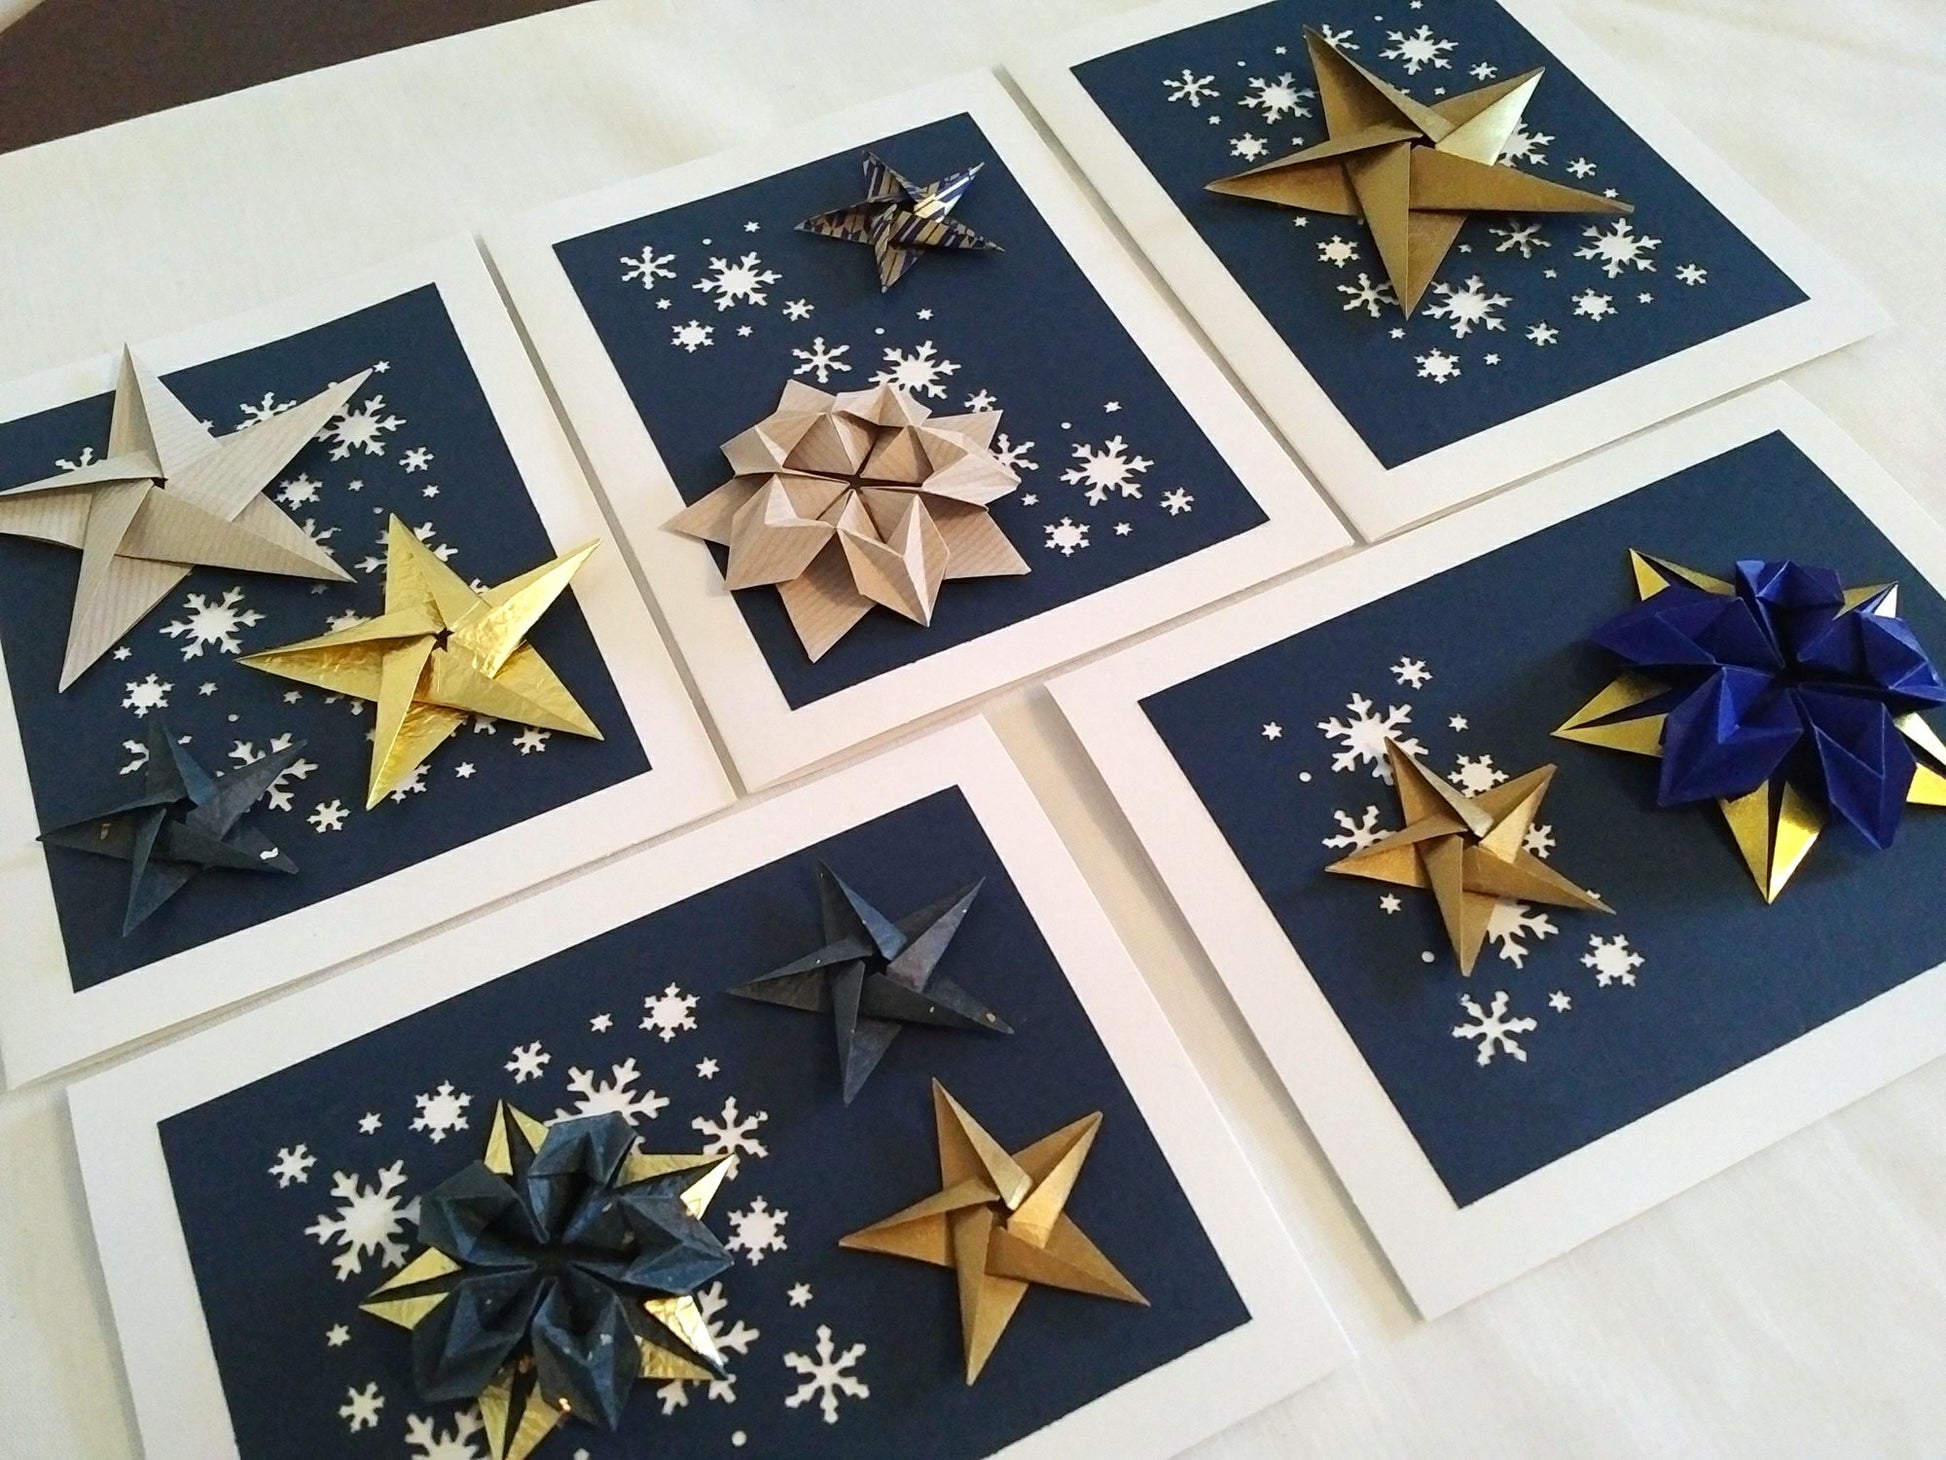 Set of five white cards. Each card has a dark blue background with white snowflakes. On top are a variety of origami stars in white, gold and blue.